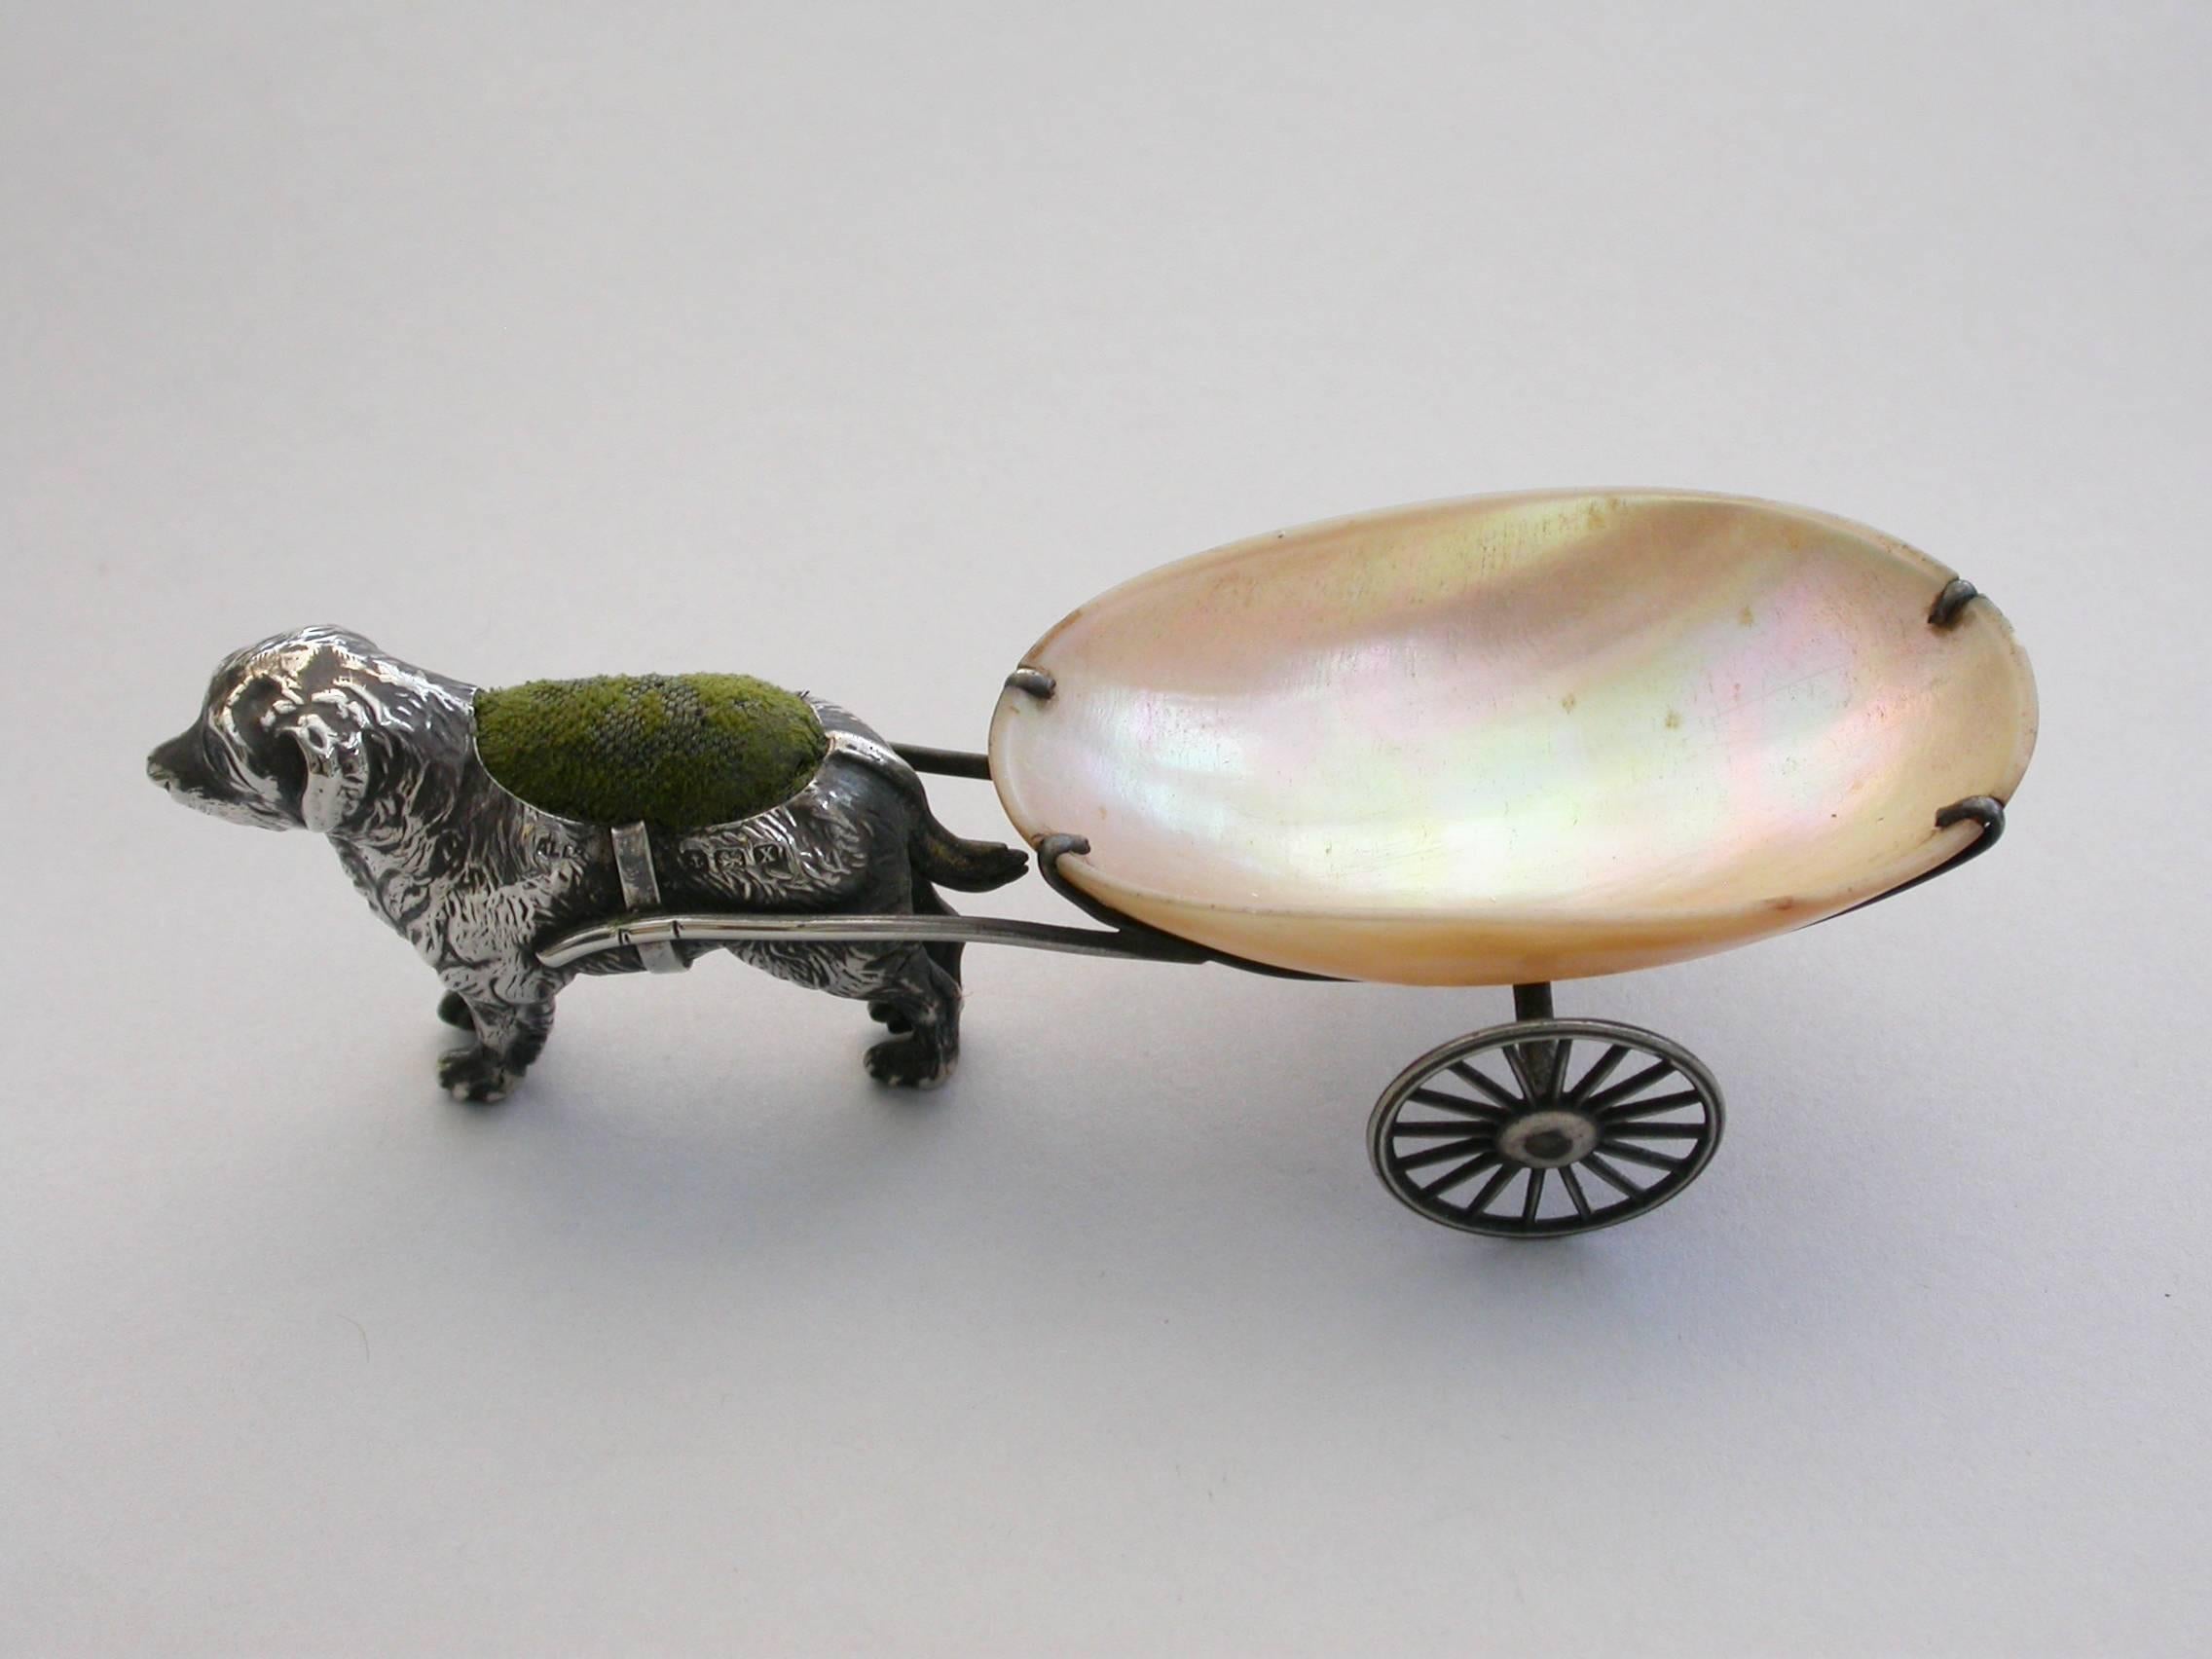 An extremely rare George V novelty silver Pin Cushion, modeled as a dog (possibly a Newfoundland) pulling a shaped mother-of-pearl cart on two wheels. The dog realistically modeled with fine detail and complete with original velvet cushion.

By